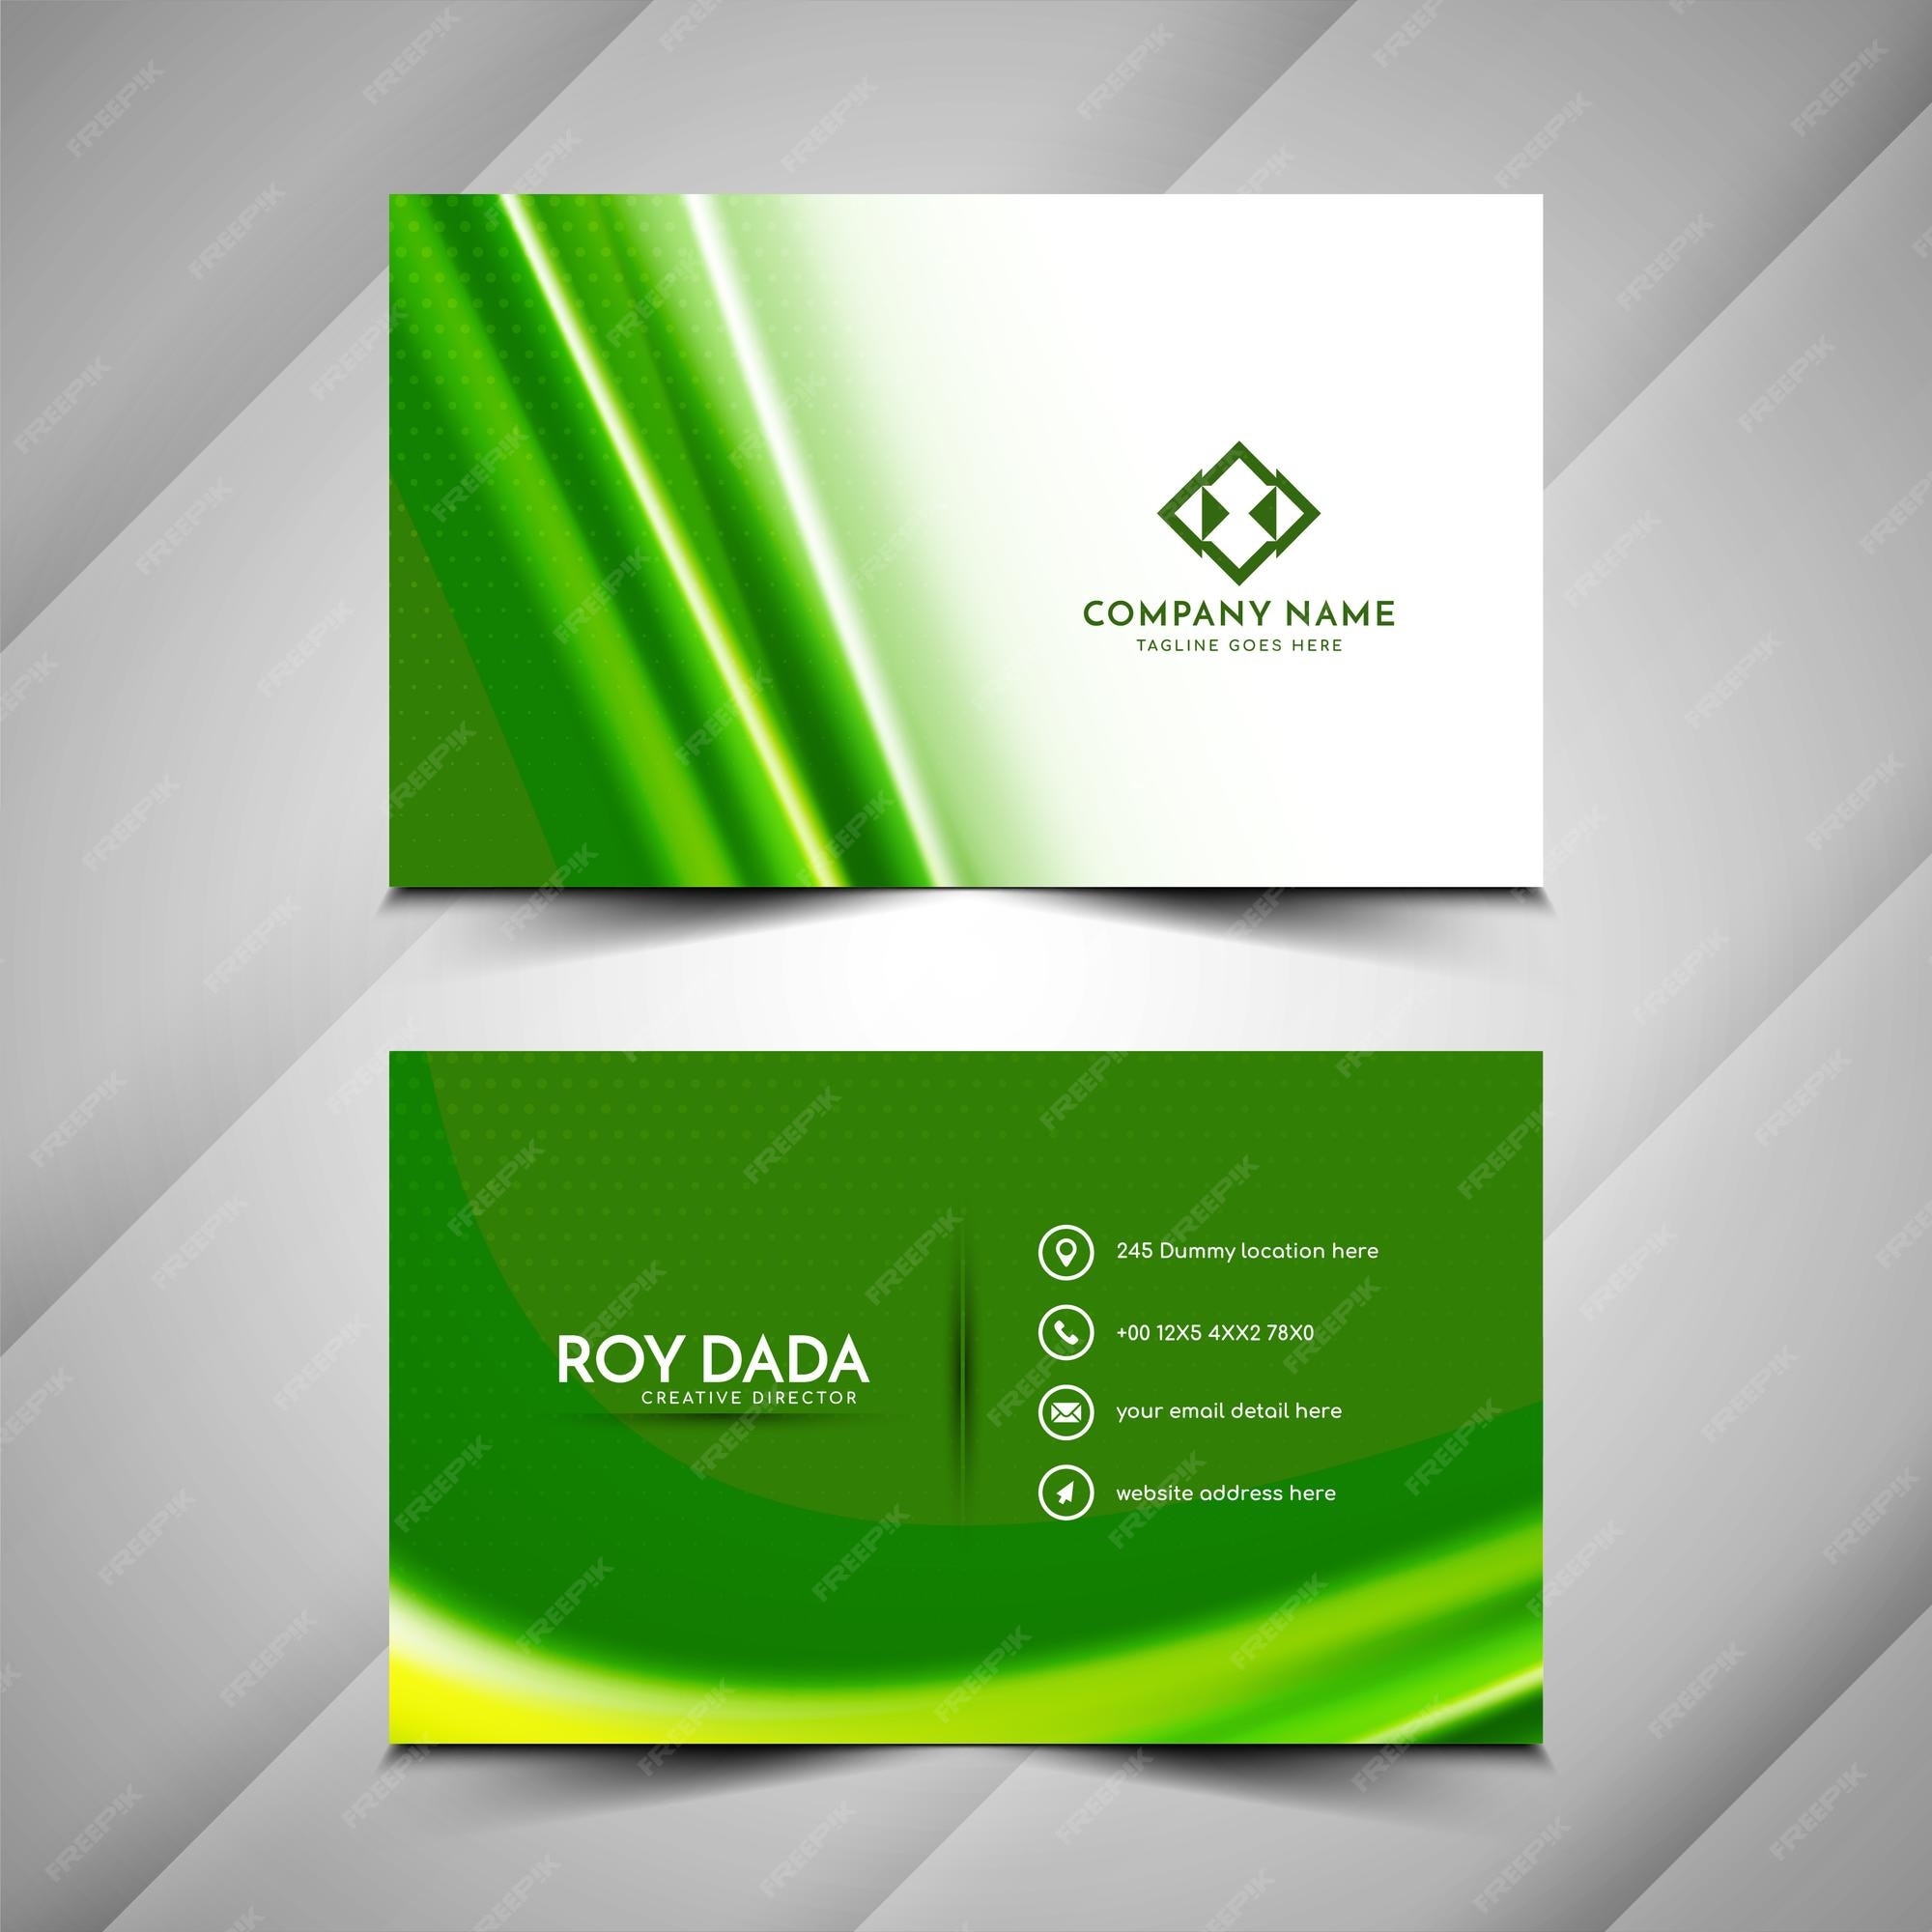 Free Vector | Elegant green color wave style business card template